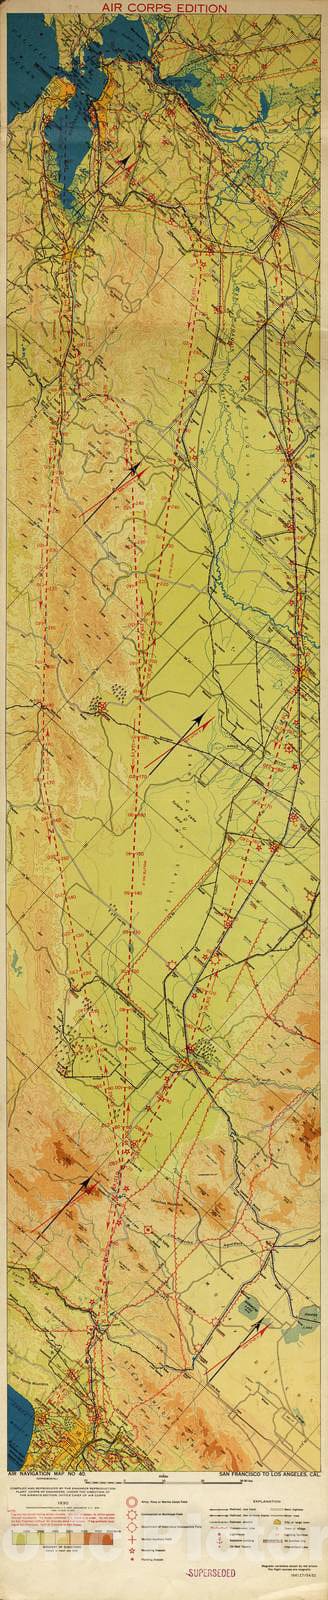 Historic 1924 Map - Aeronautical Strip maps of The United States. - No. 40, 1930 - rev. 1932 - Air Corps map